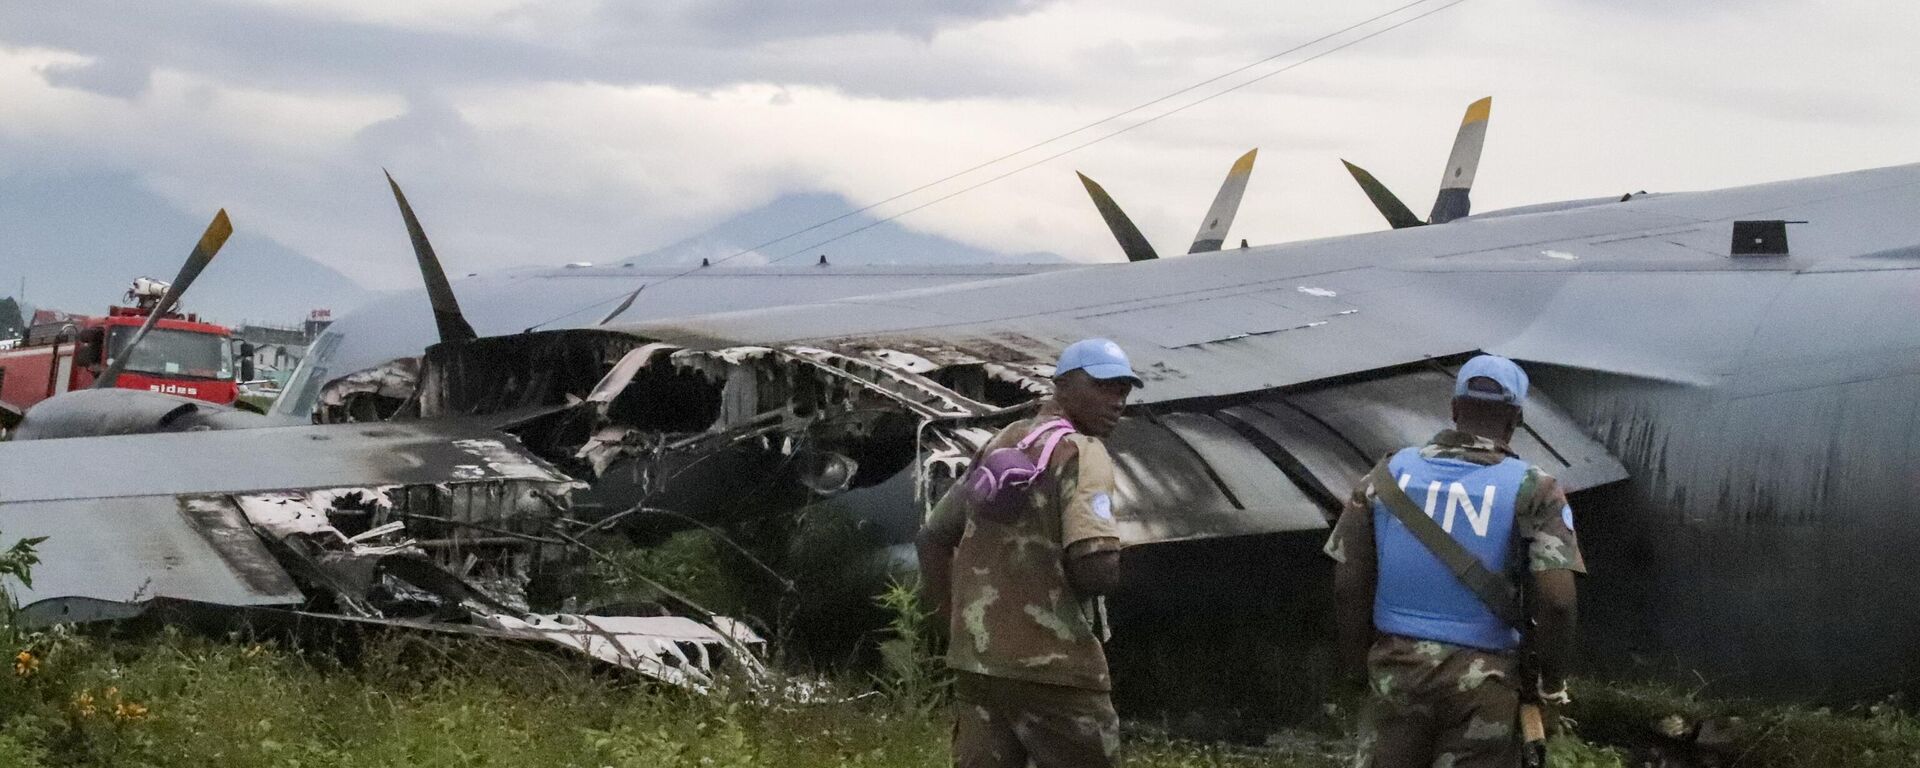 United Nations personnel attend the scene where a South African air force plane crash-landed and caught fire at the airport in Goma, eastern Congo Thursday, Jan. 9, 2020. - Sputnik Africa, 1920, 23.11.2023